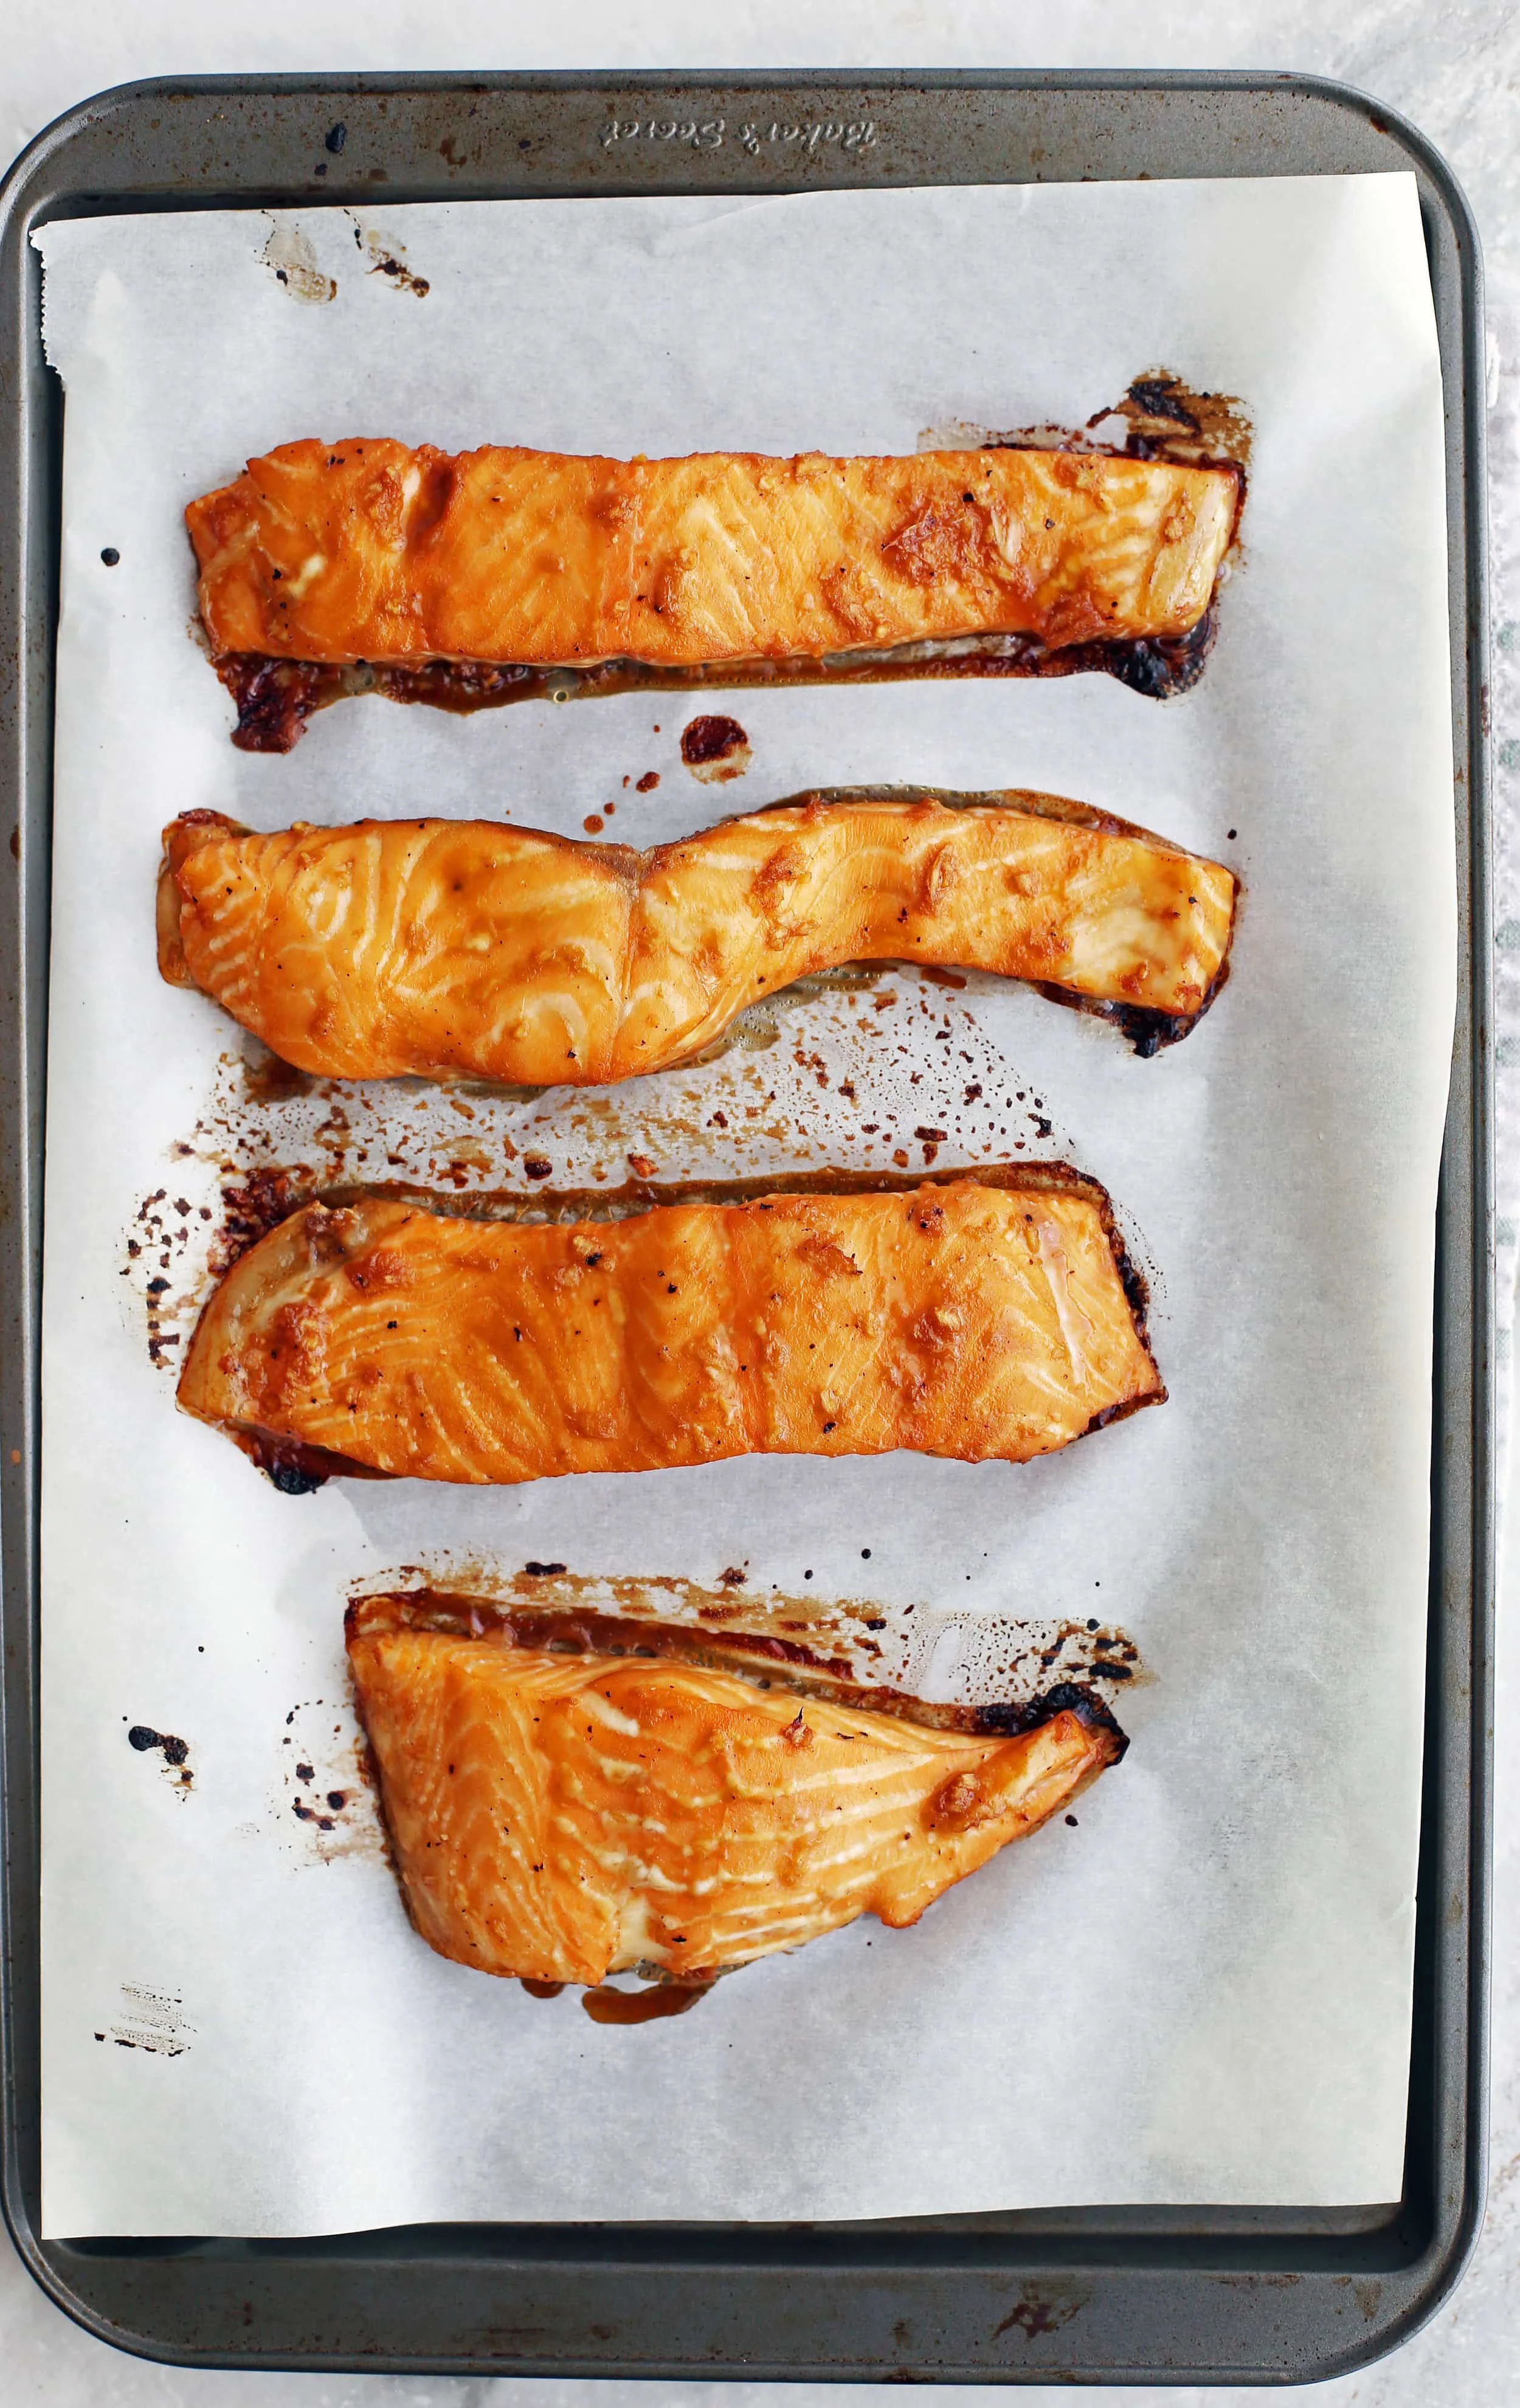 Four maple-soy baked salmon fillets on a baking sheet.